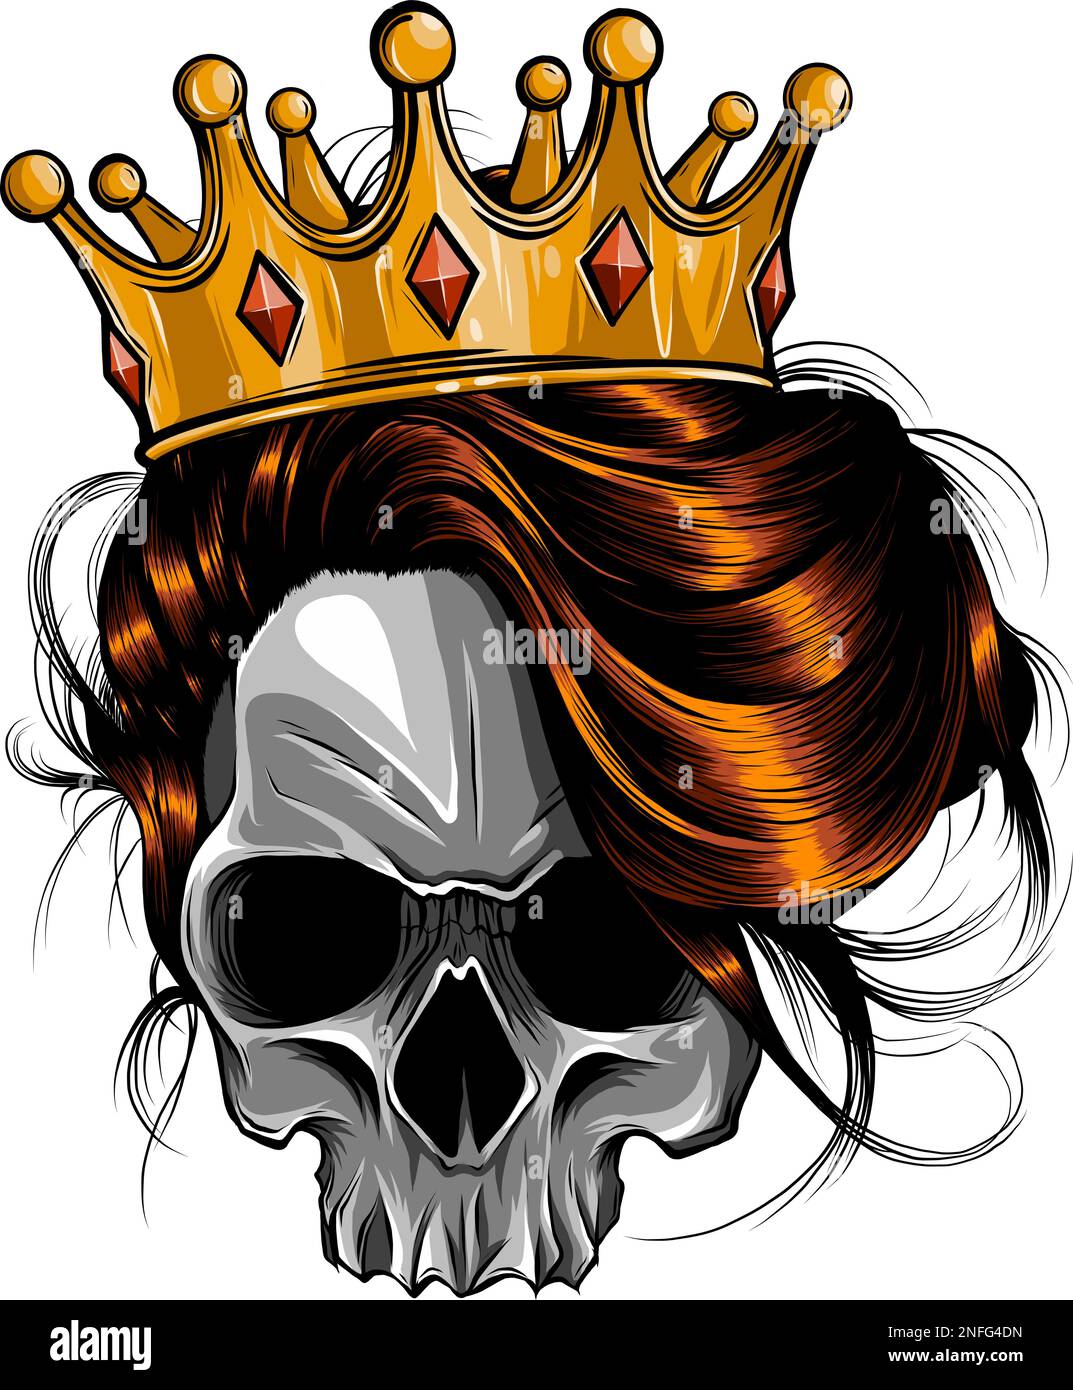 Queen of death. Portrait of a skull with a crown and long hair. Stock Vector